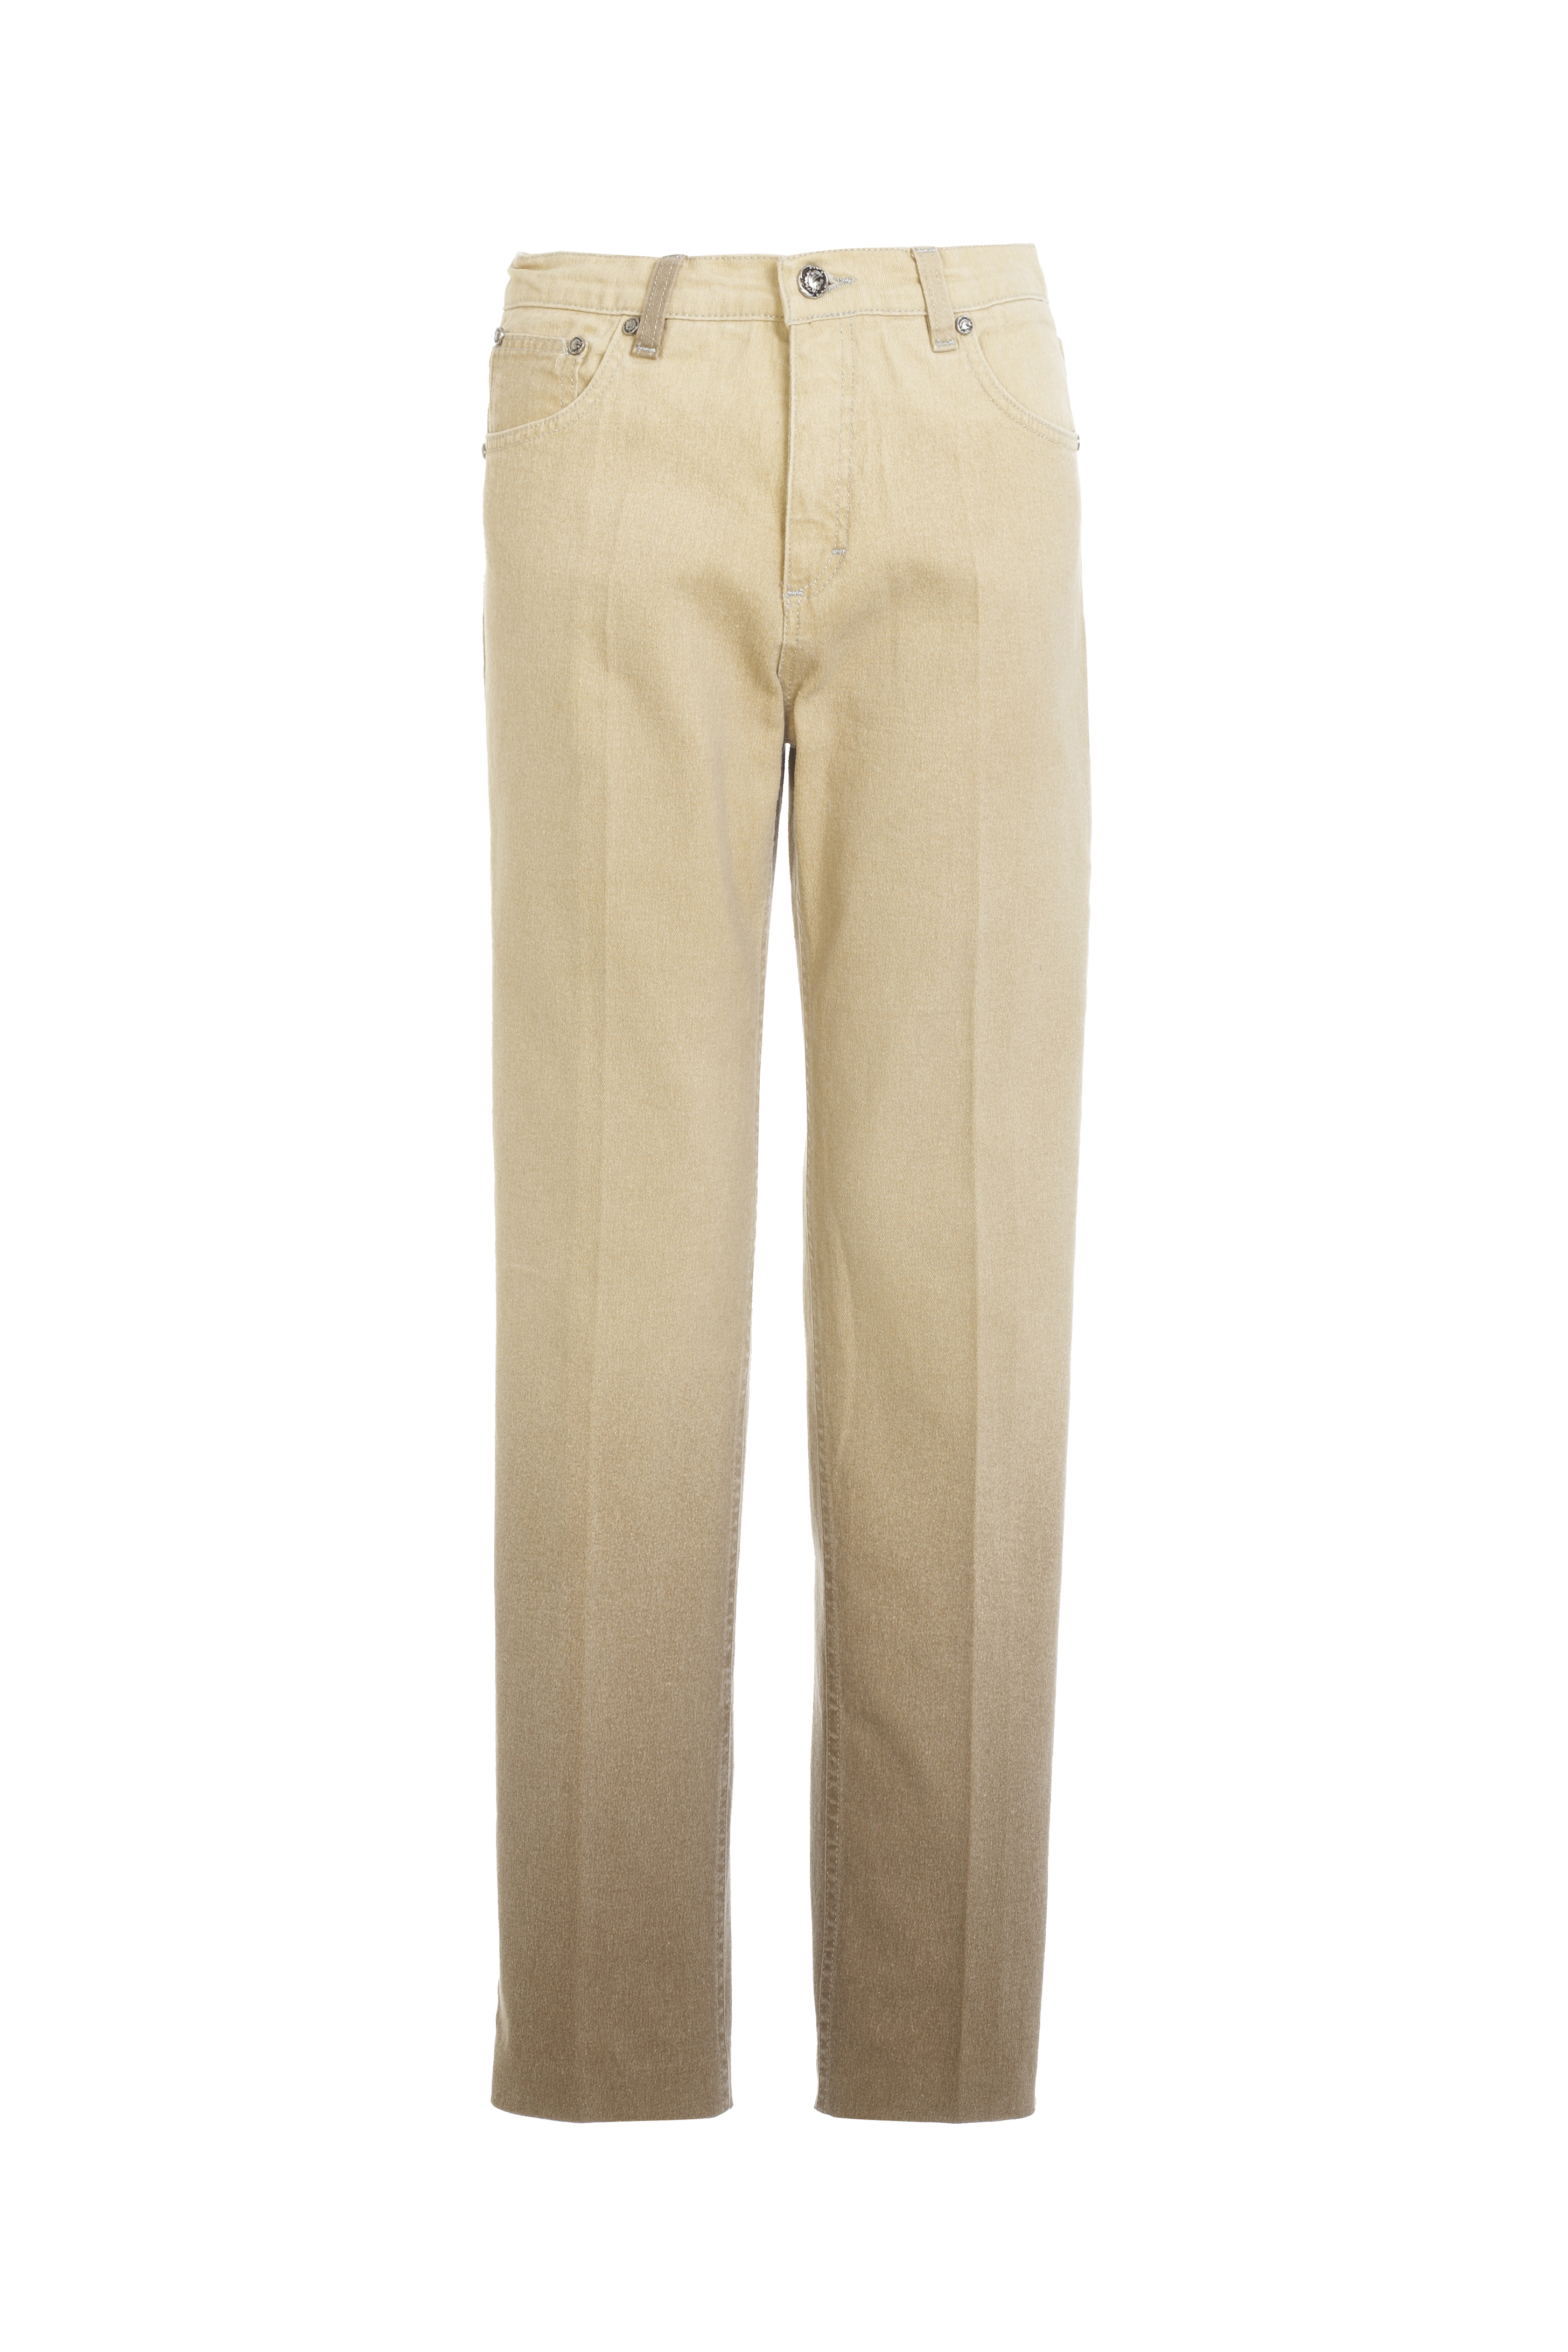 Roberto Cavalli yellow and brown denim jeans | Curate8